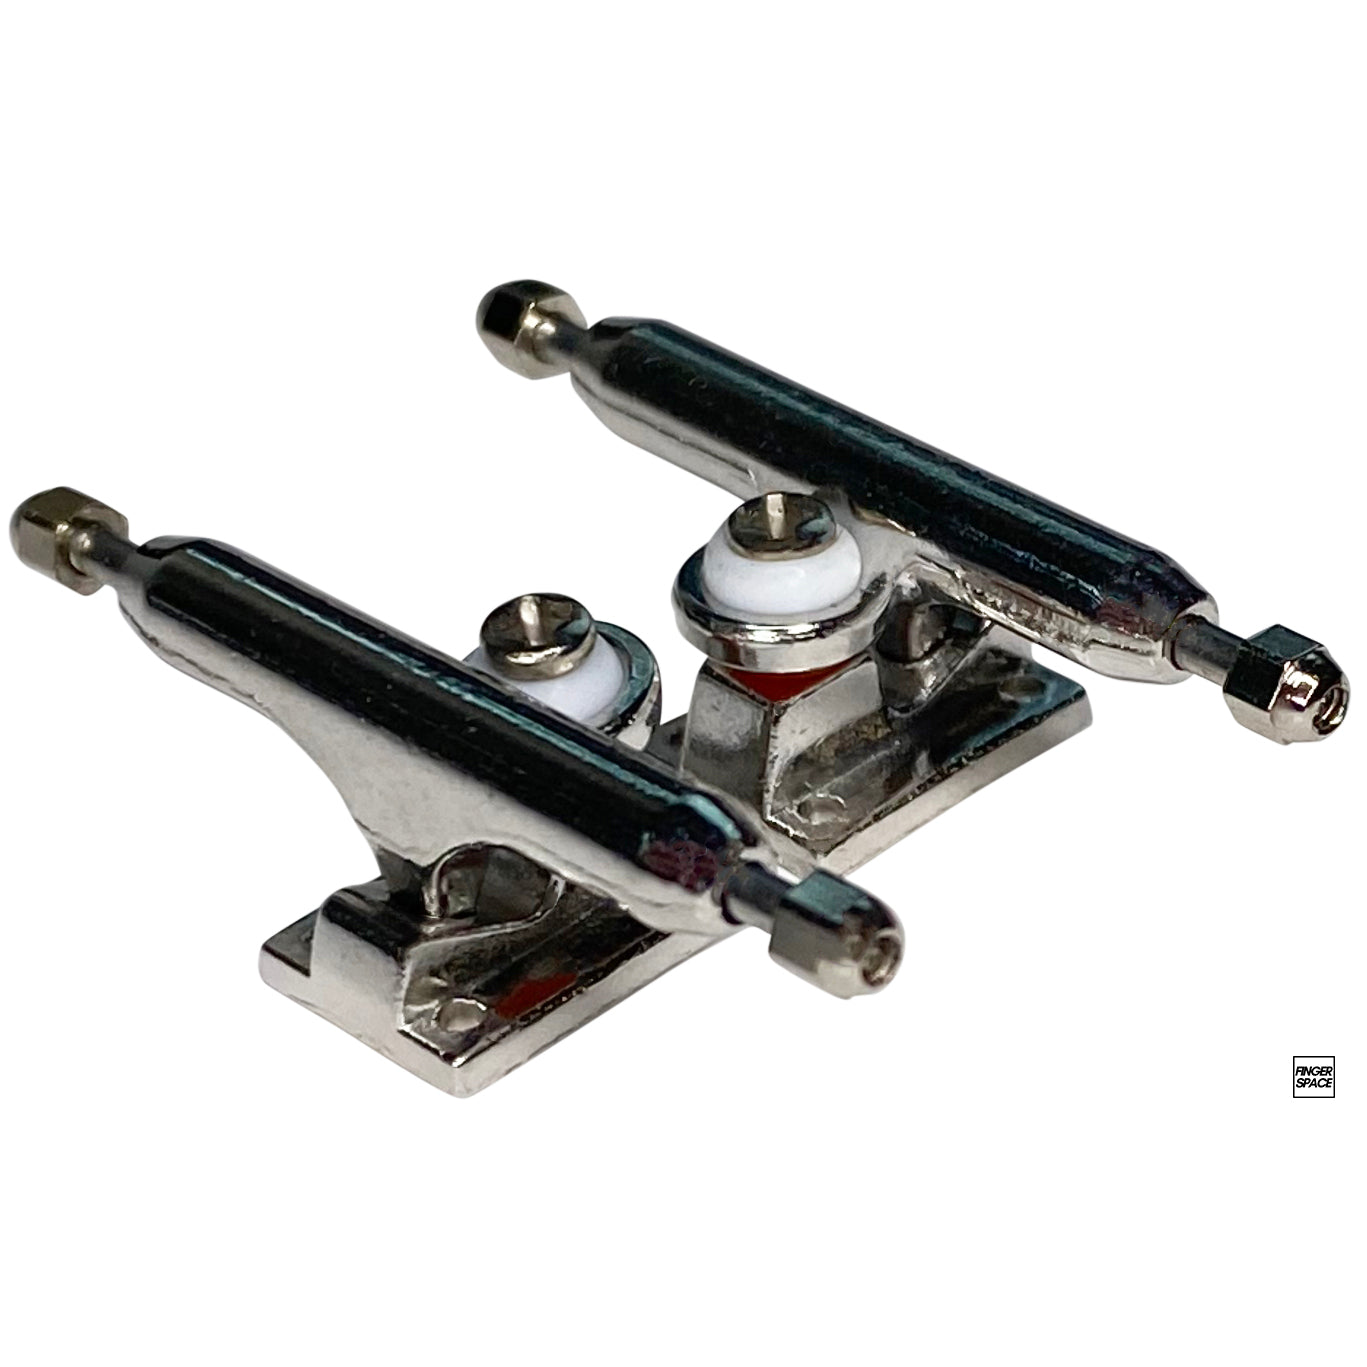 34mm Pro Inverted Kingpin Fingerboard Trucks - "Chroma" Colorway